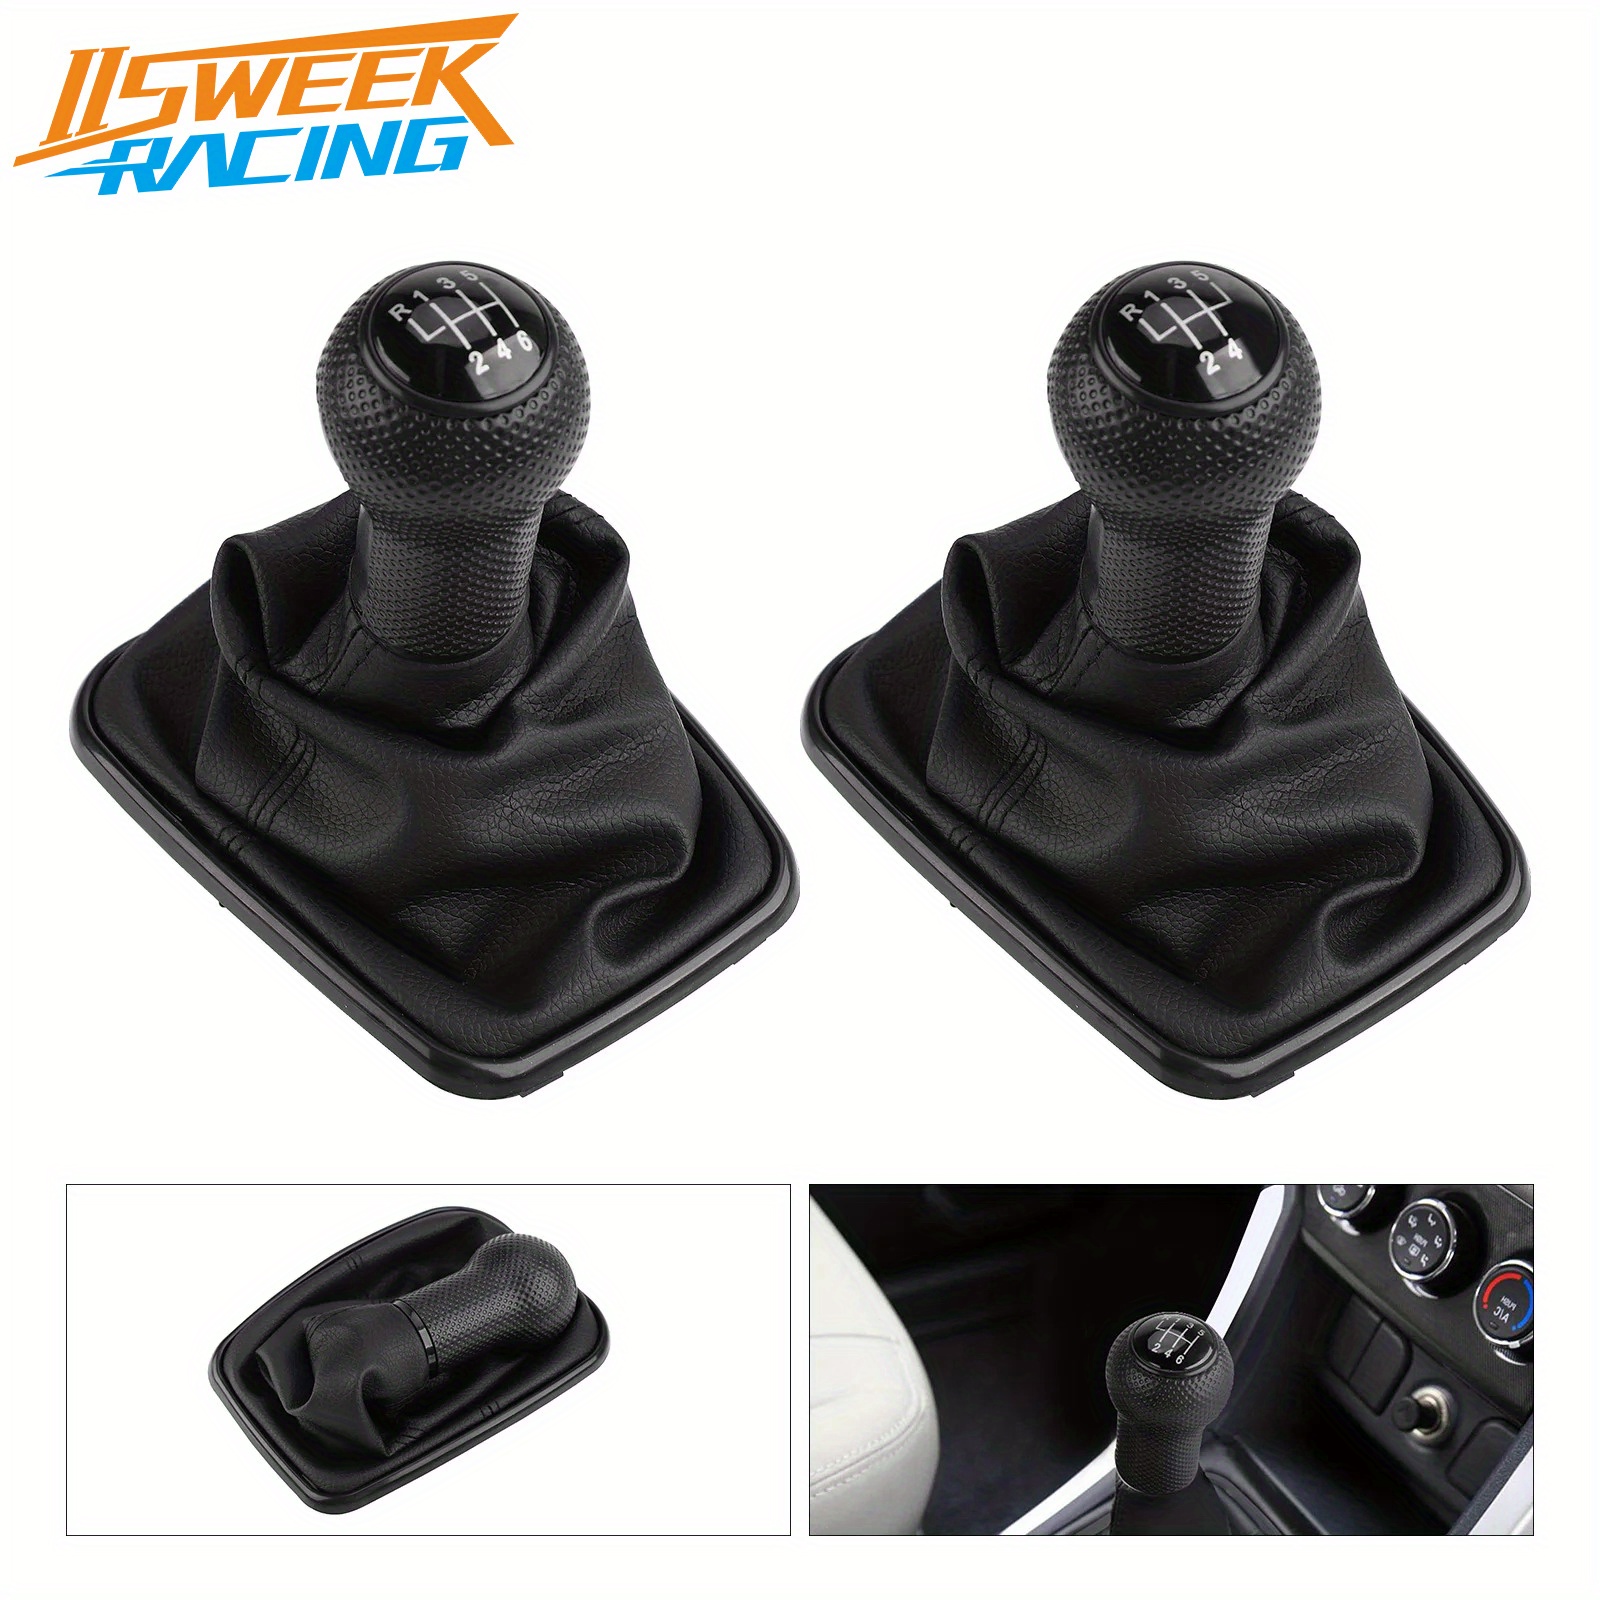 

5/6 Speed Gear Shift Knob Lever Shifter Gait Boot 12mm For Volkswagen 1999-2005 For Vw For Golf 4 Iv Mk4 R32 For Mt